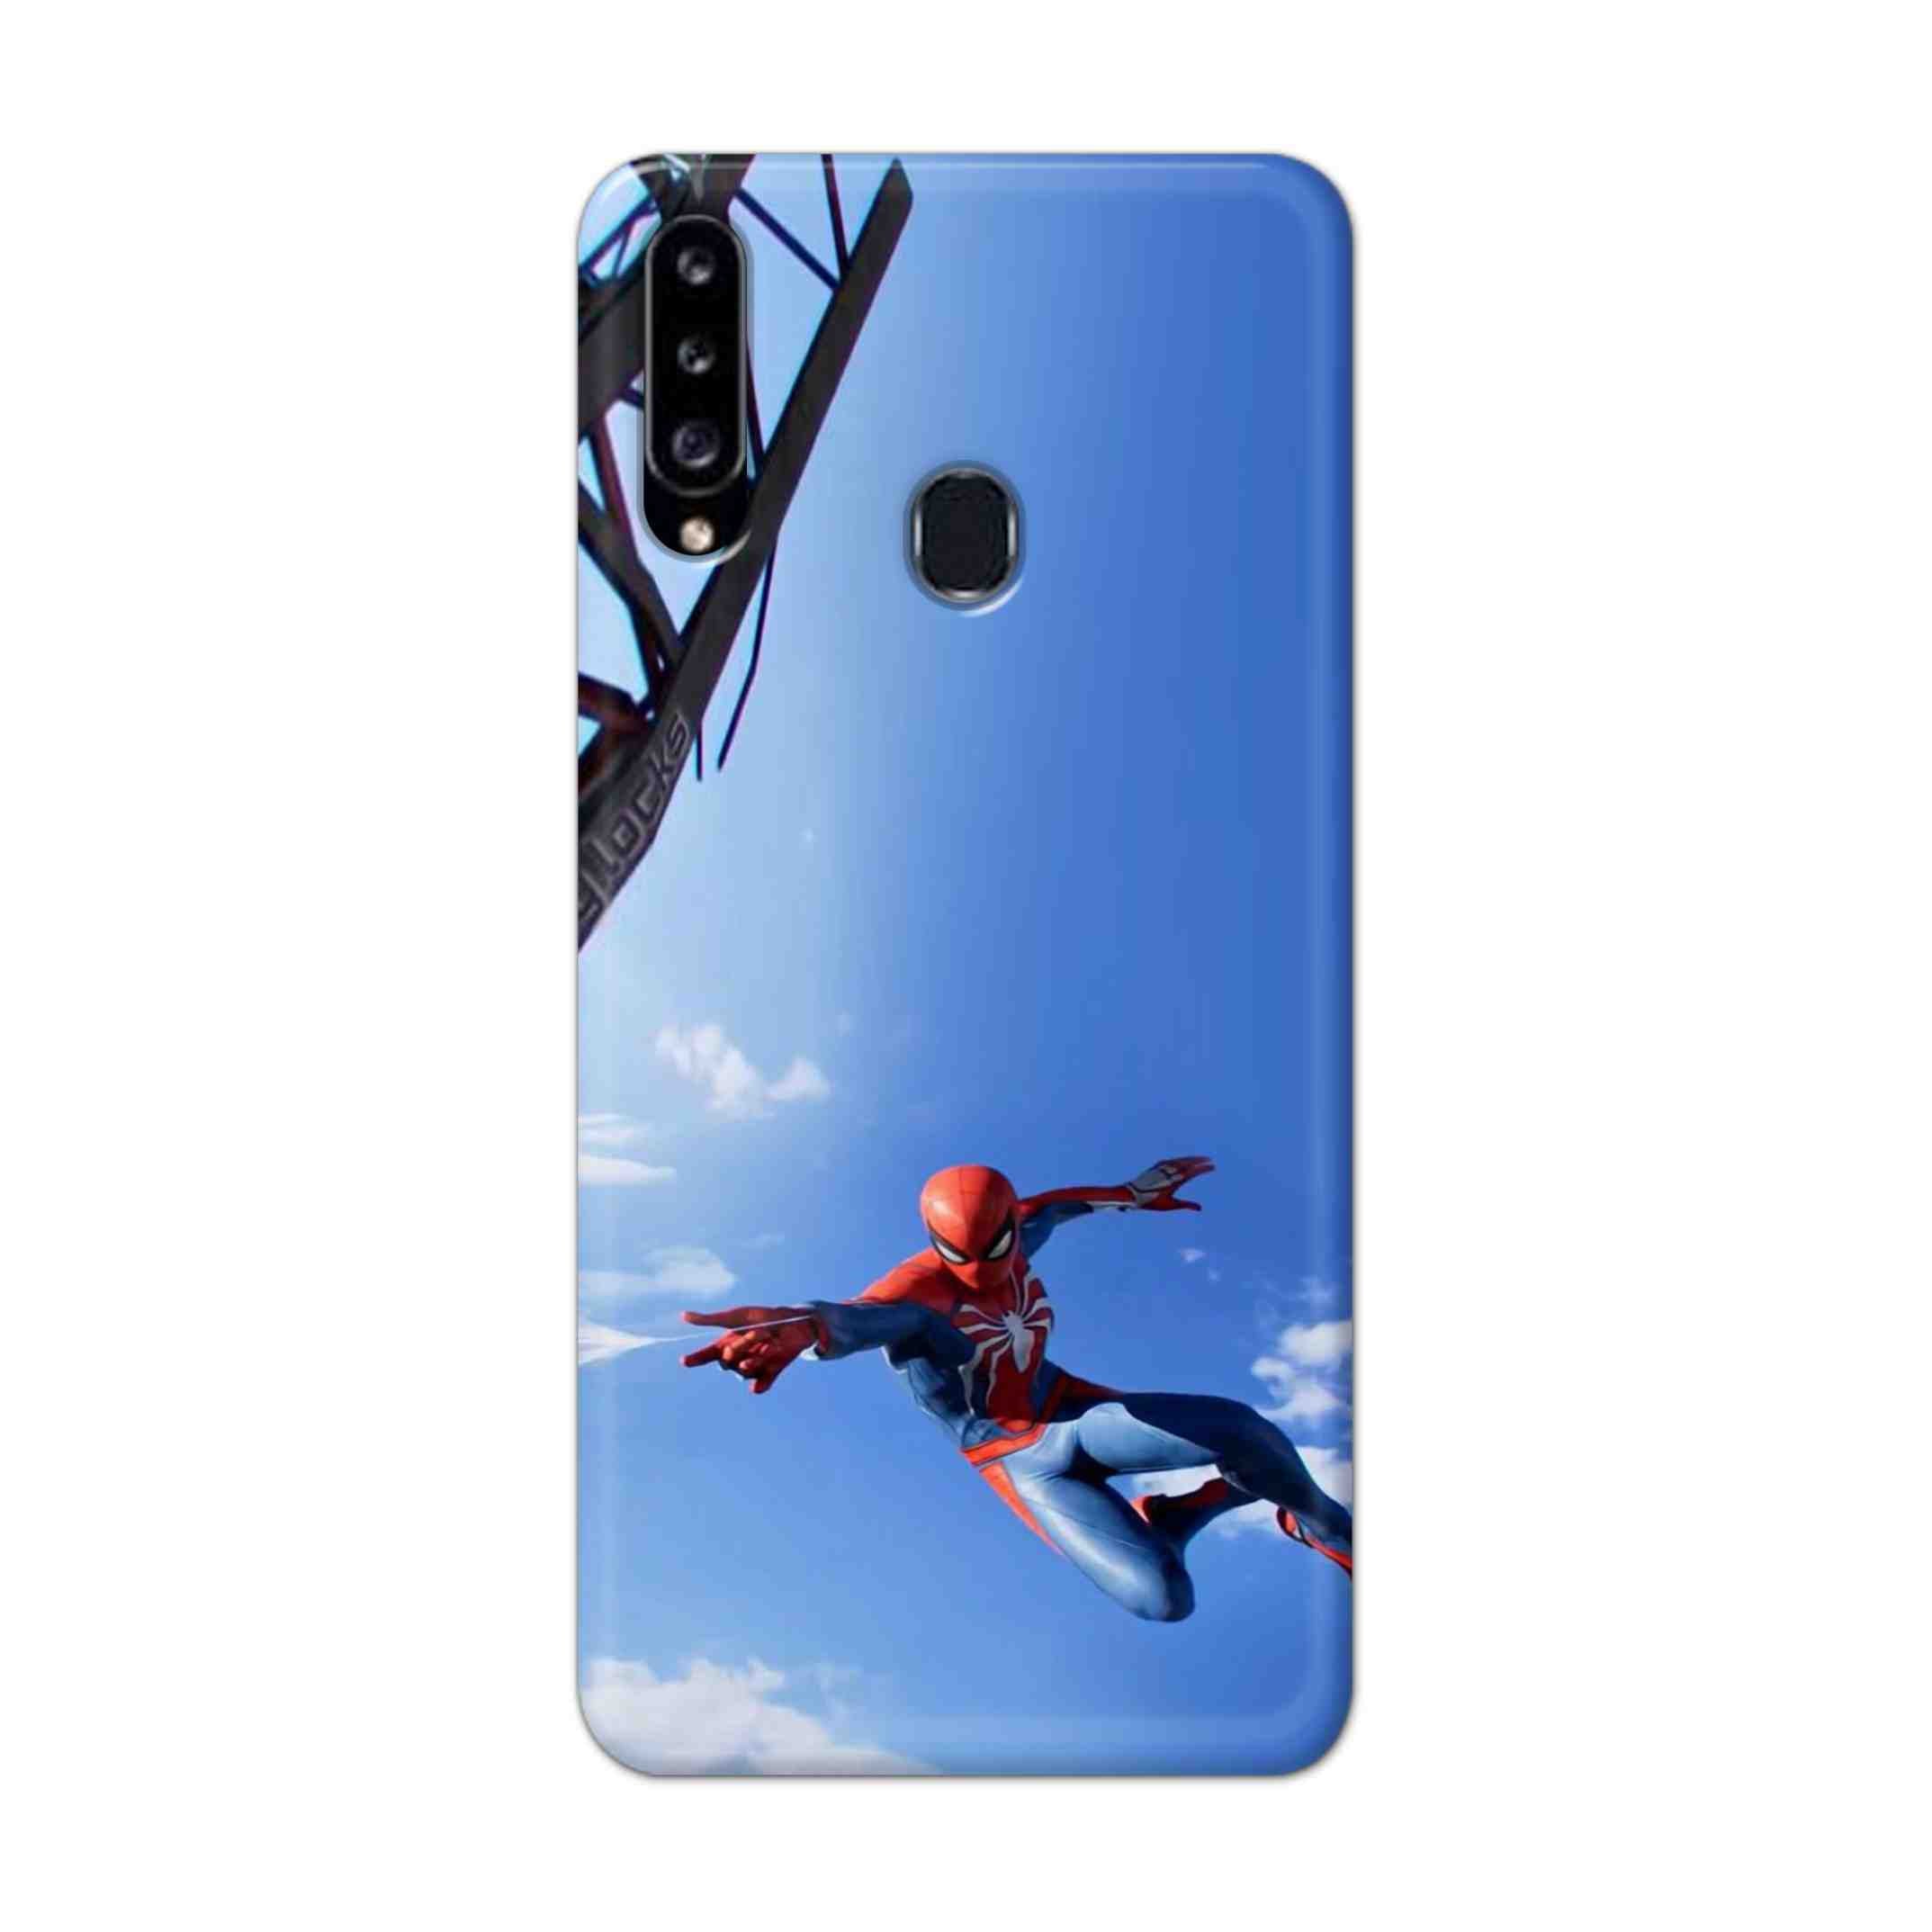 Buy Marvel Studio Spiderman Hard Back Mobile Phone Case Cover For Samsung Galaxy A21 Online